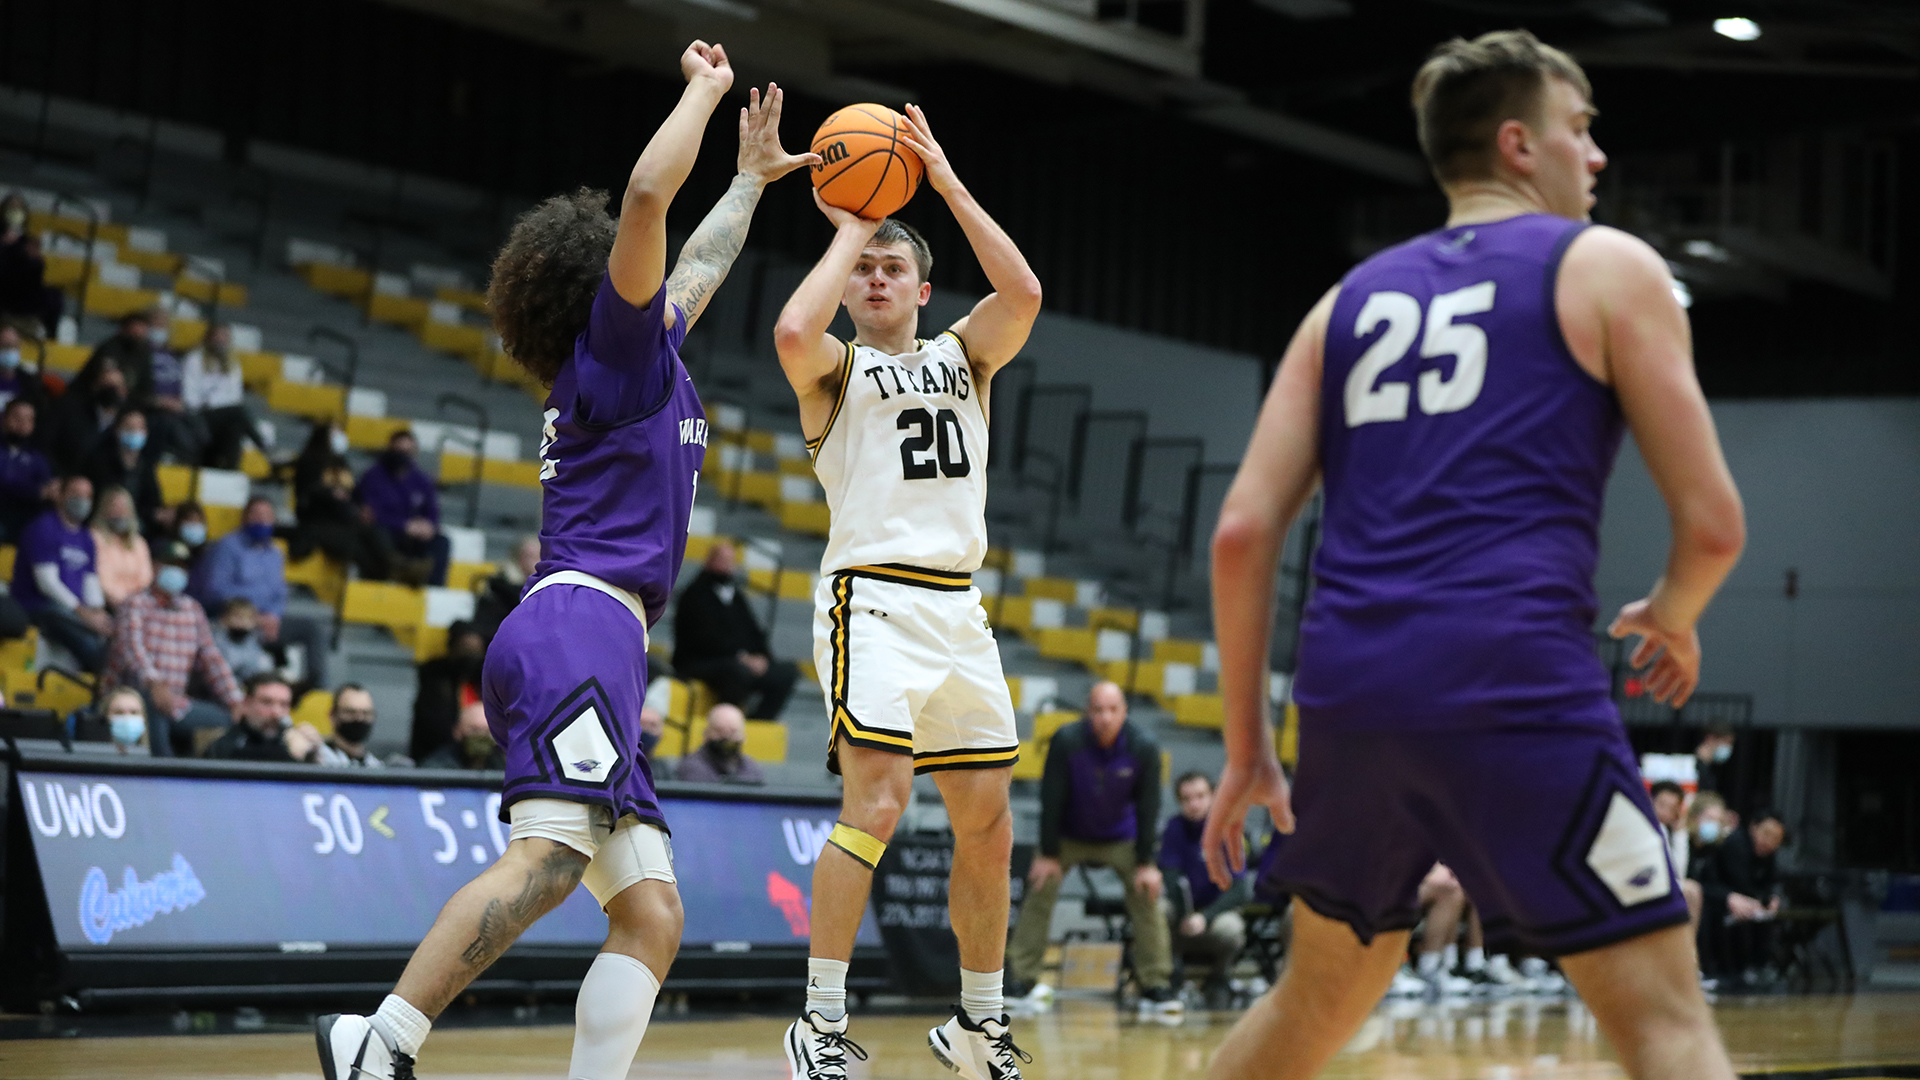 Quinn Steckbauer scored a career-high 25 points, including four 3-point baskets, with five rebounds against the Warhawks.